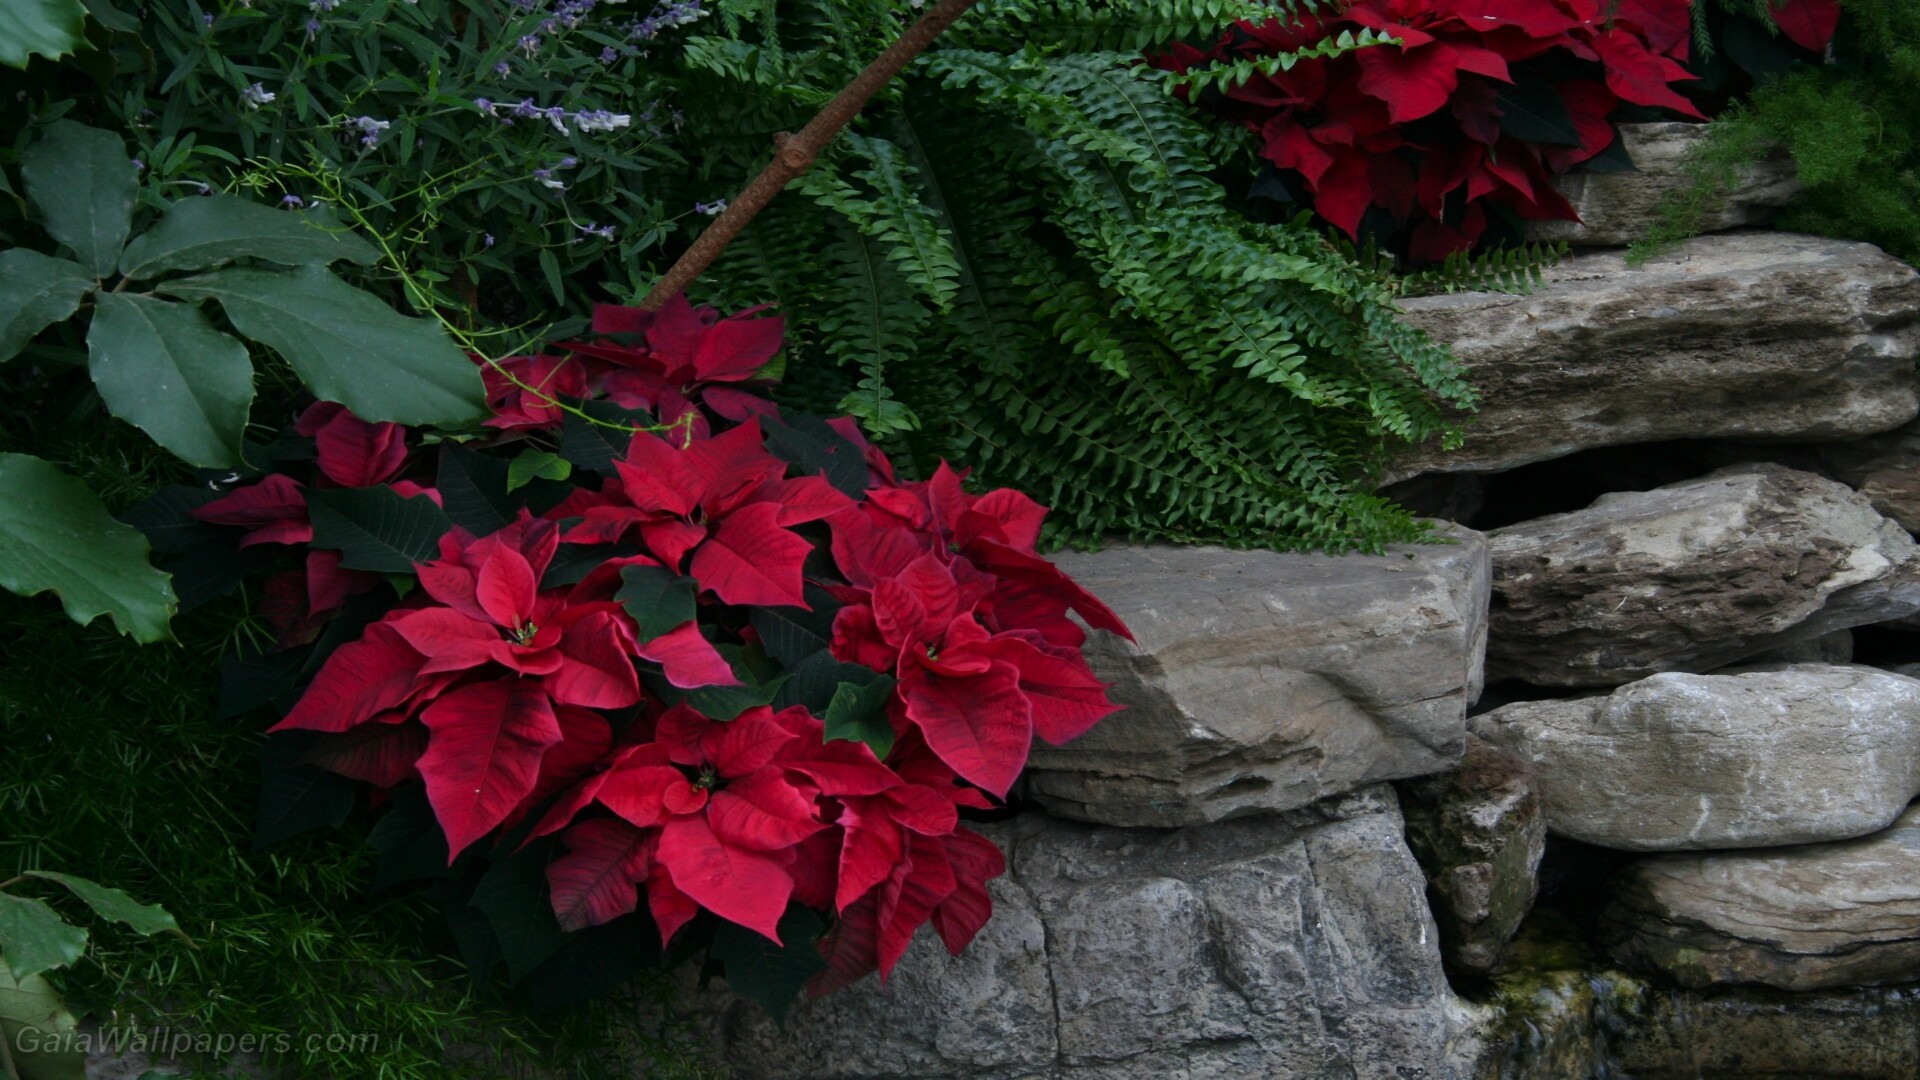 Poinsettia: The Paul Ecke Ranch in California grows over 70% of all Poinsettias purchased in the United States and does about 50% of the worldwide sales of Poinsettias. 1920x1080 Full HD Background.